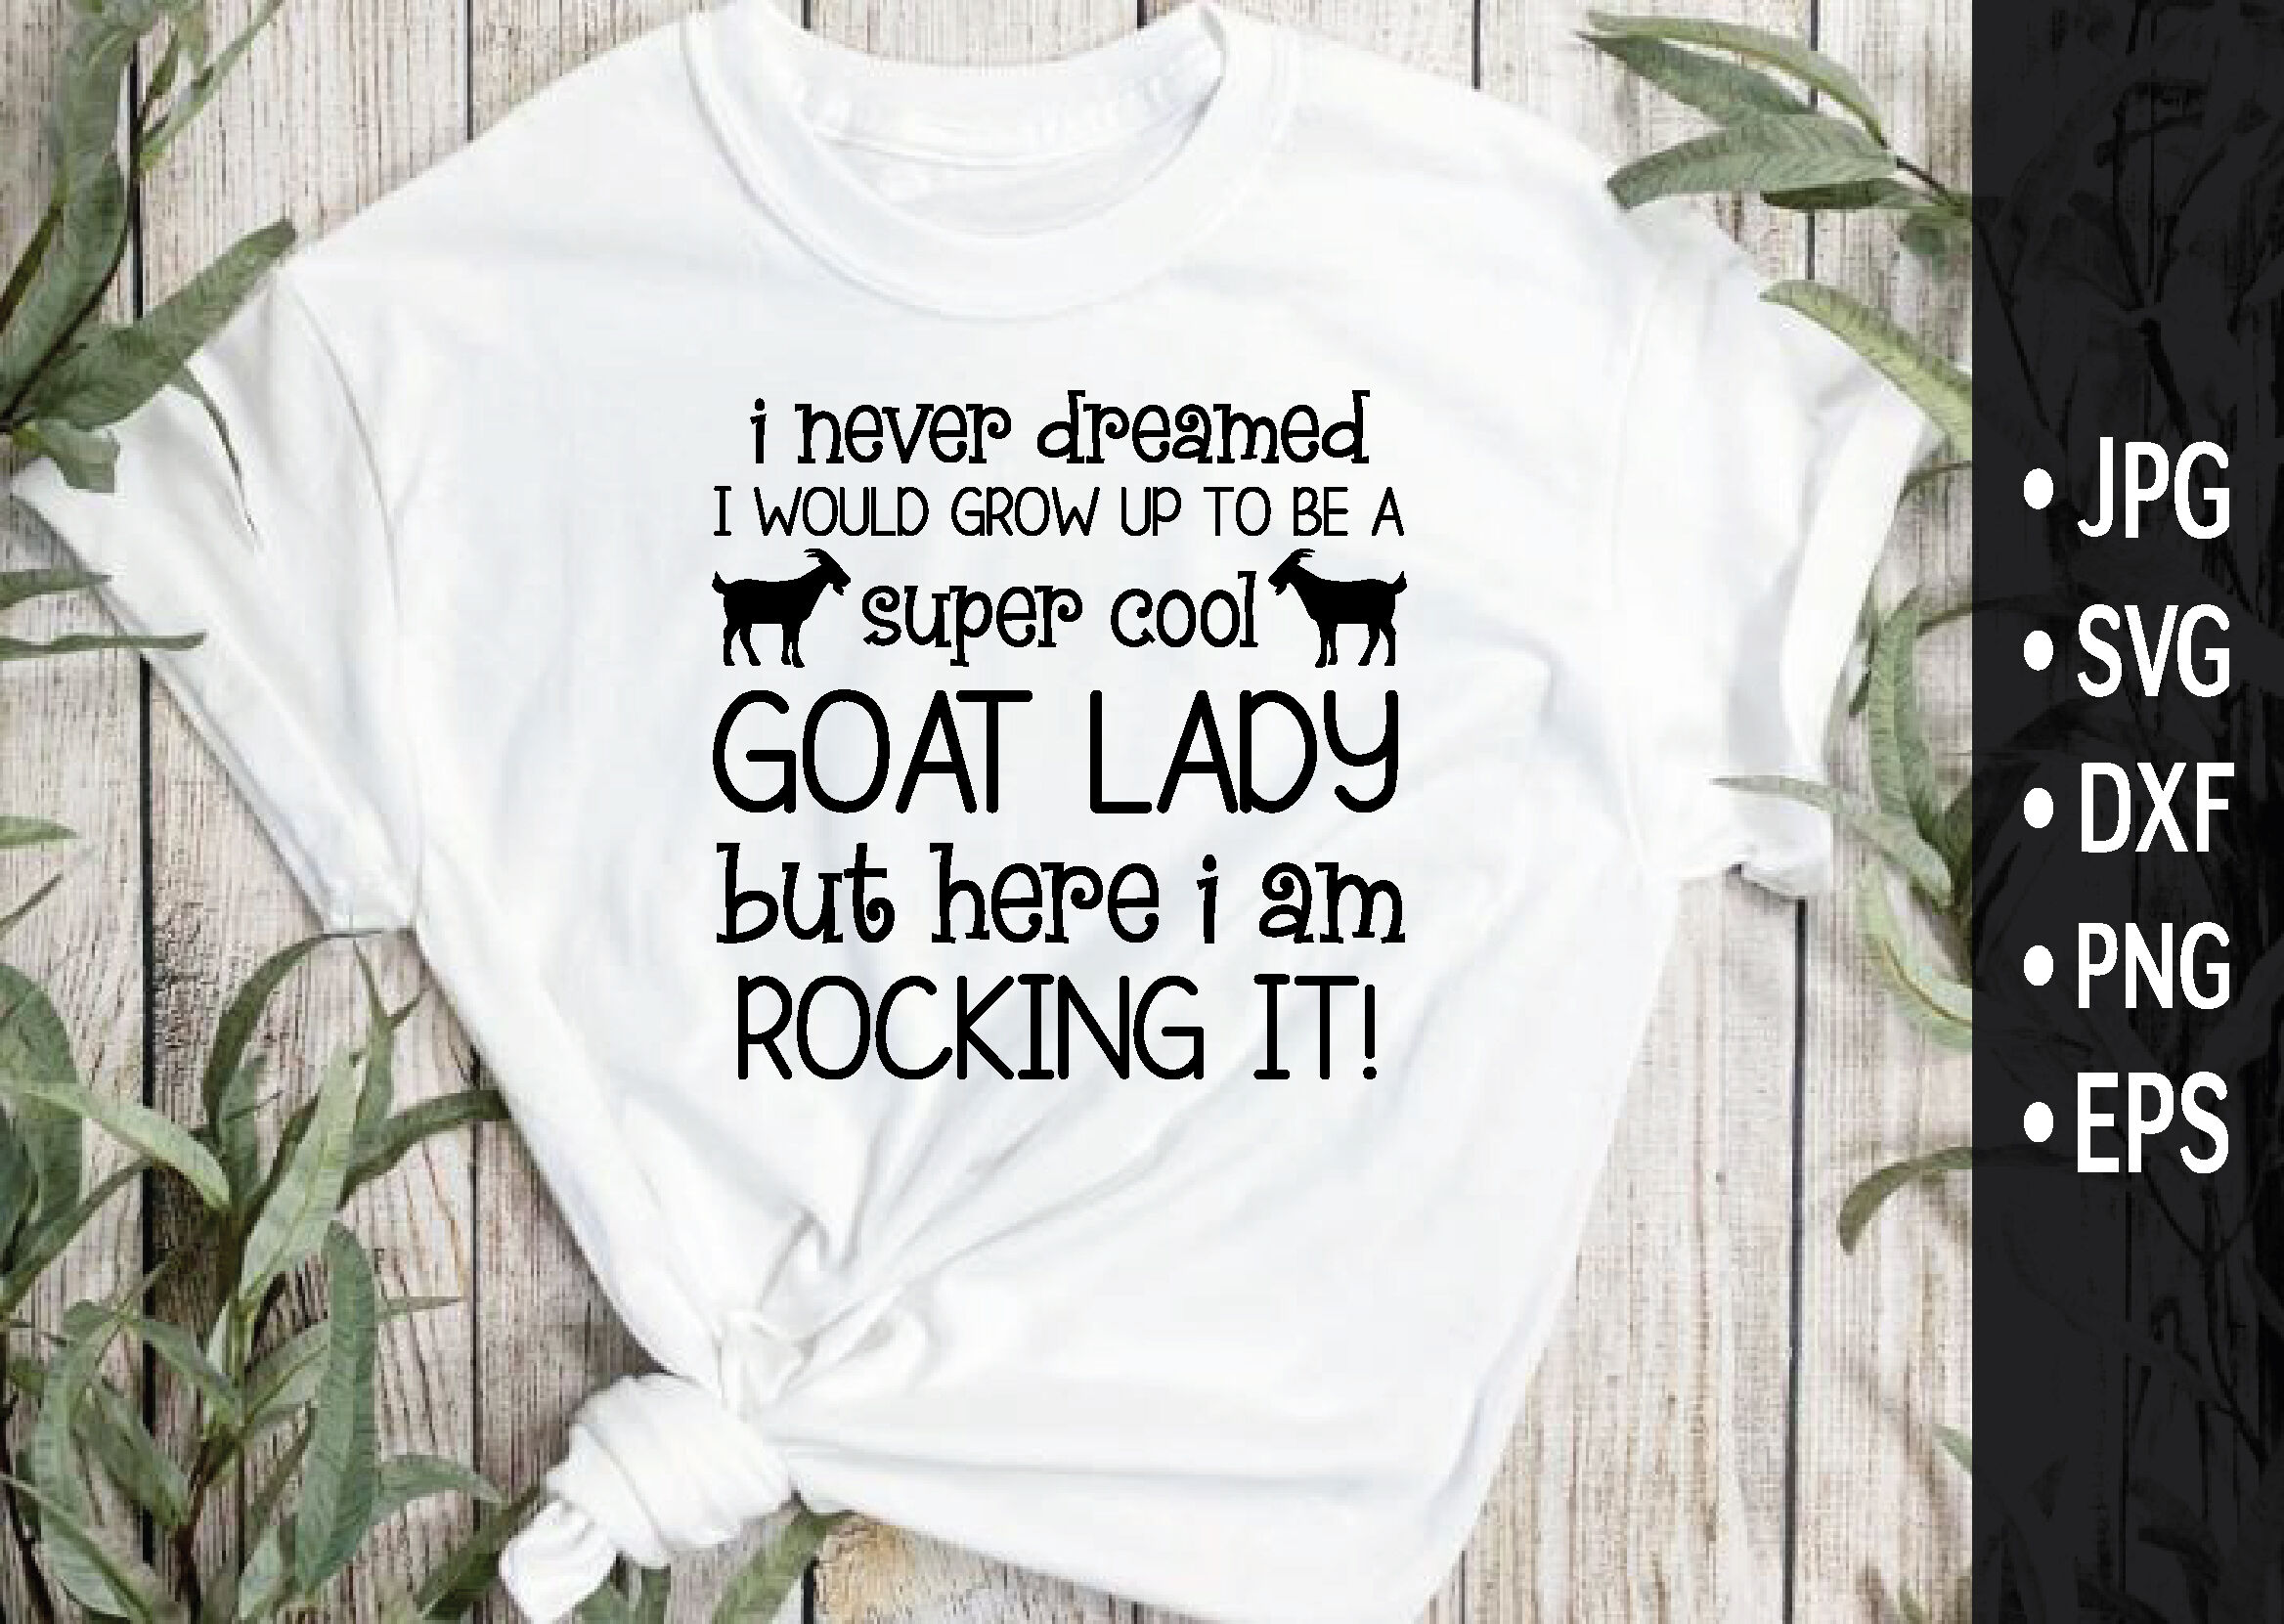 T - shirt that says i never planned to be a super good goat lady.